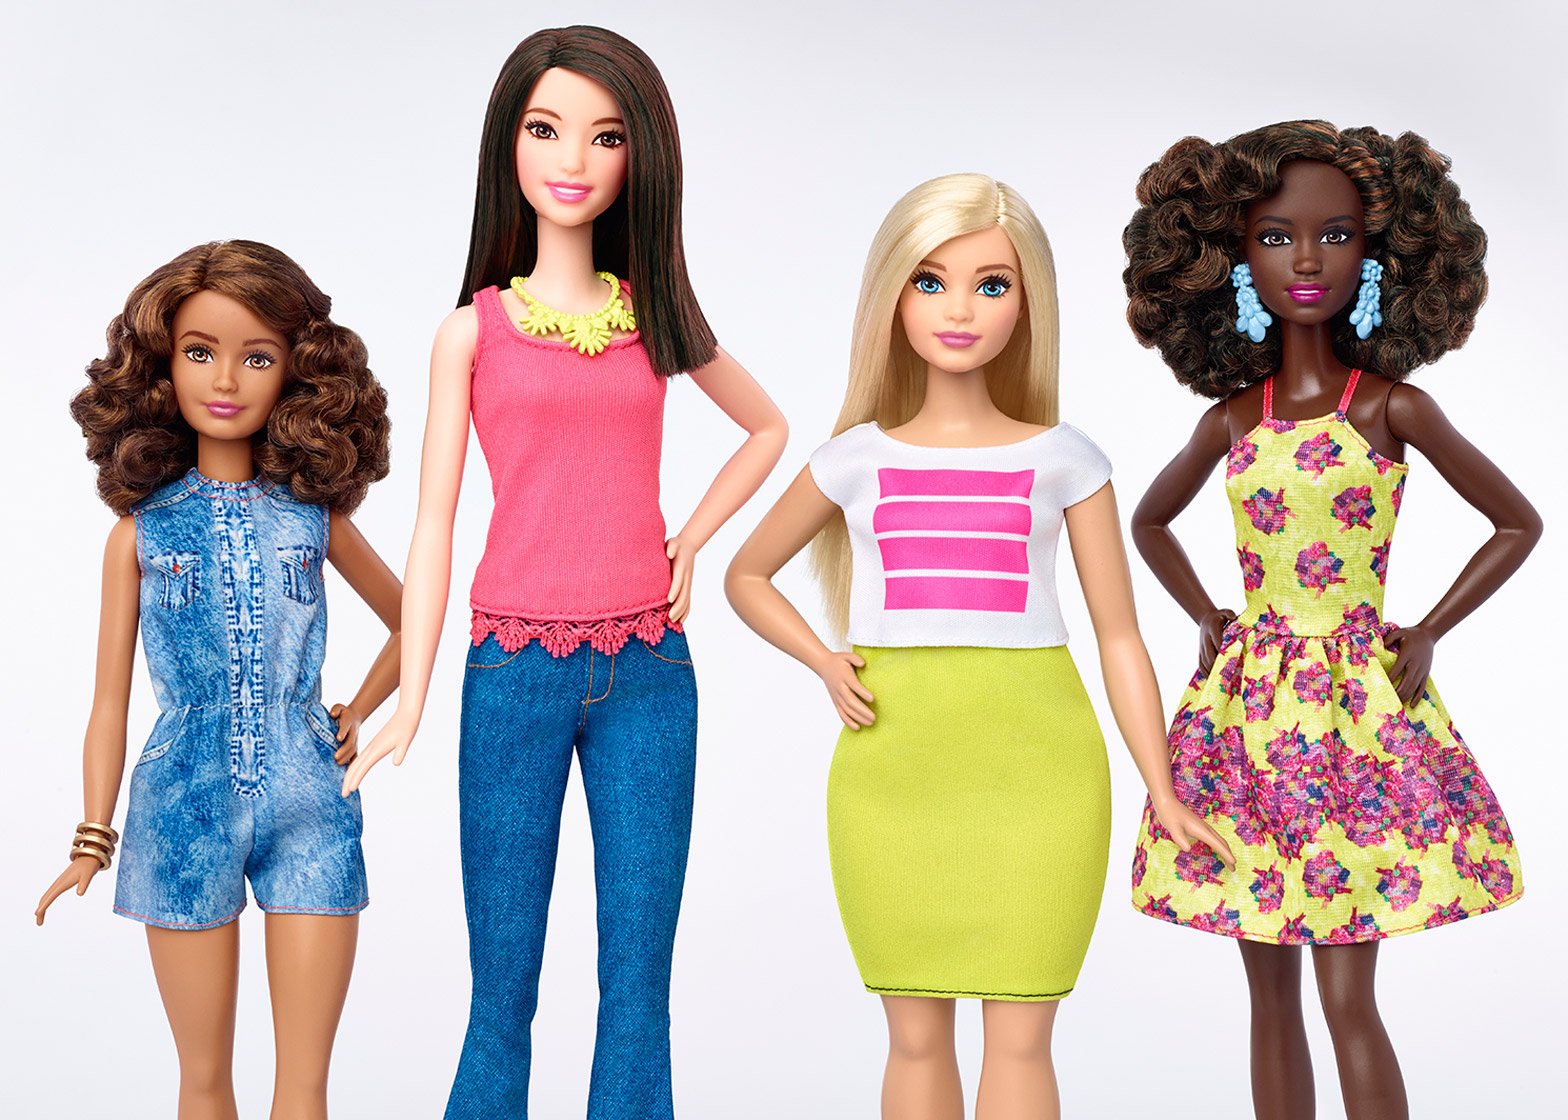 Diverse range of Barbie dolls showcasing different races, body types, and professions